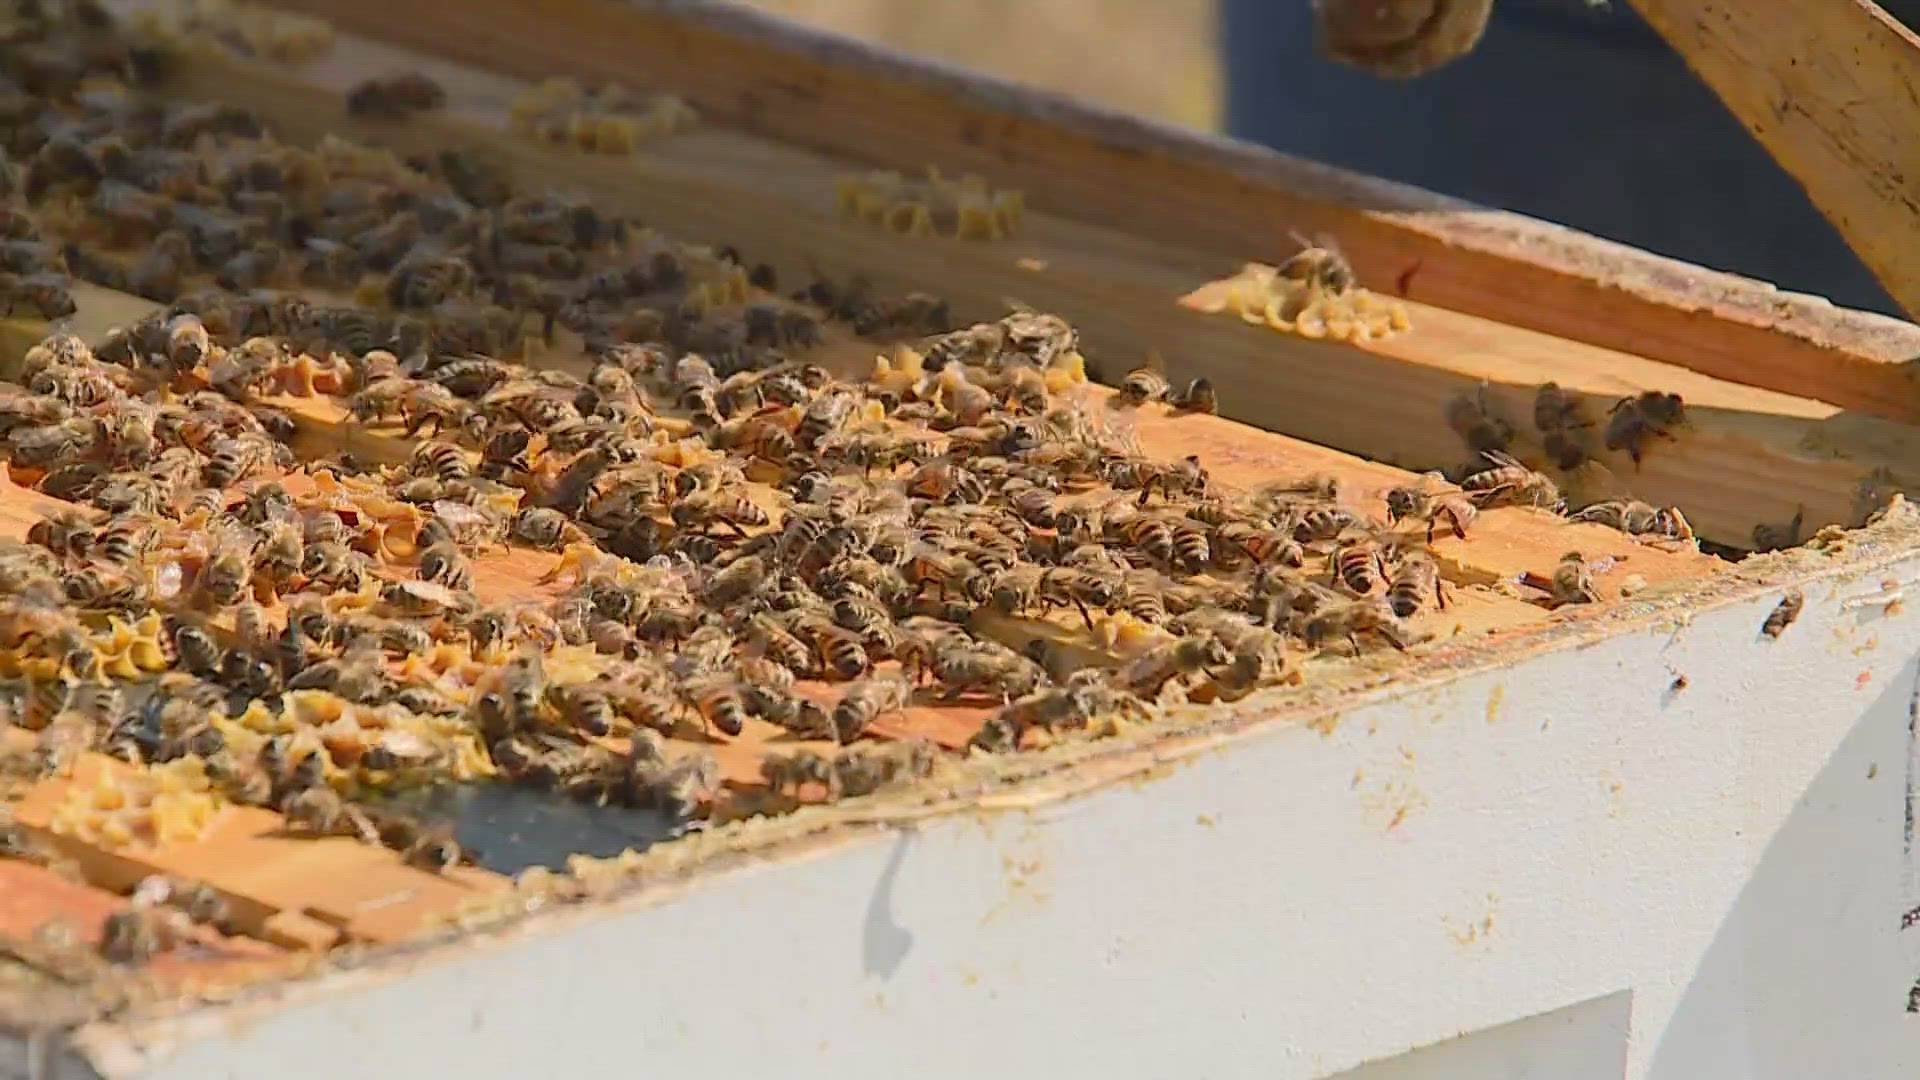 Butterfly Pavilion has around 30 beehives located around the Denver metro area where people can learn more about the importance of beekeeping and pollinators.